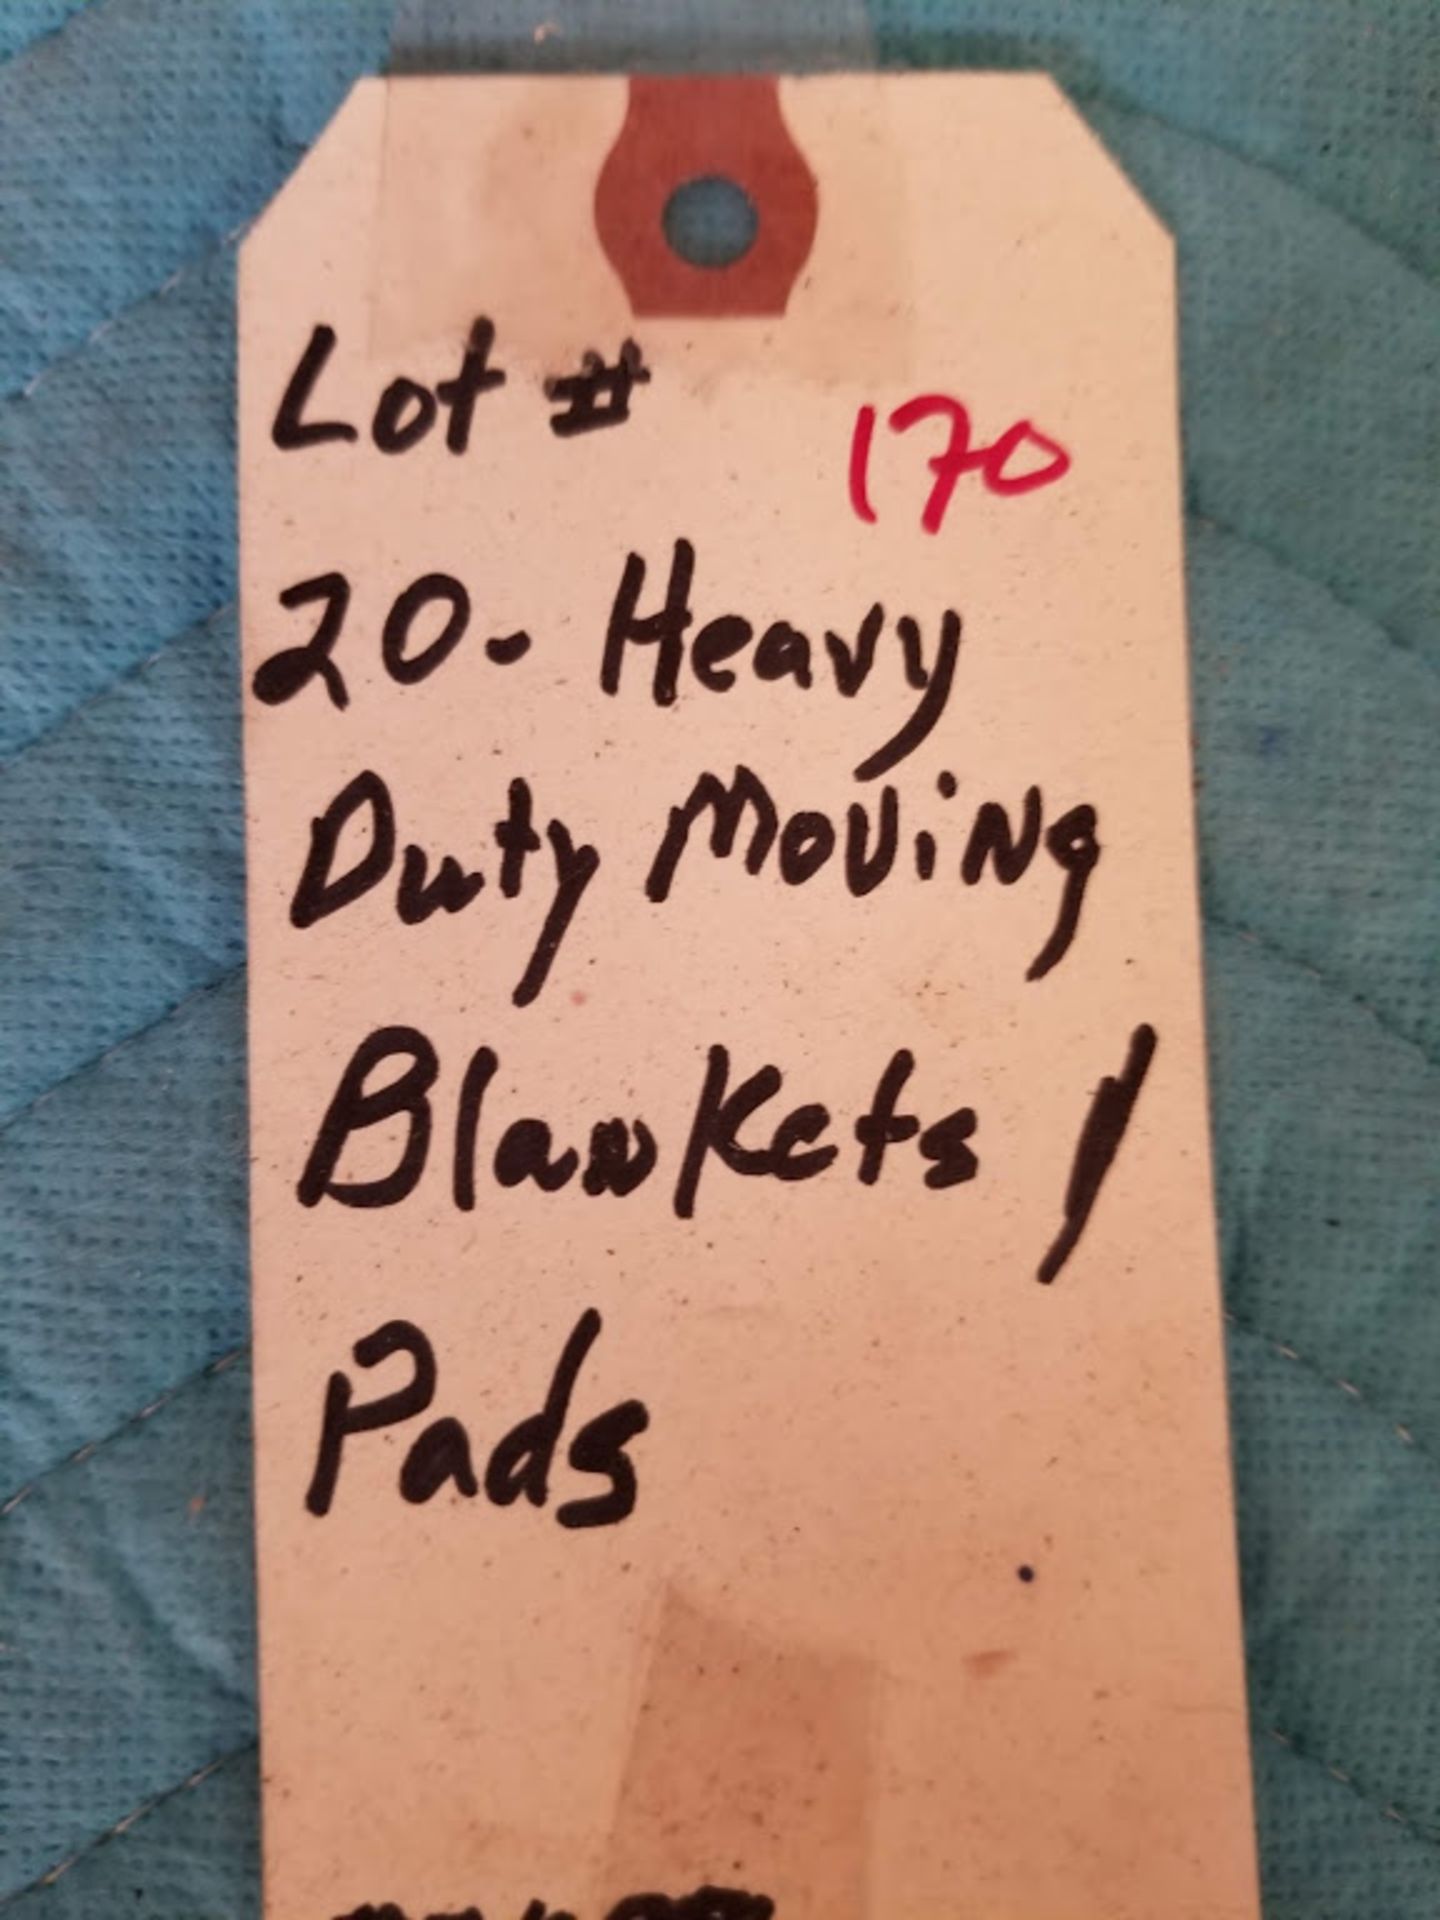 Heavy Duty Moving Blankets/Pads (Qty 20) - Image 2 of 2